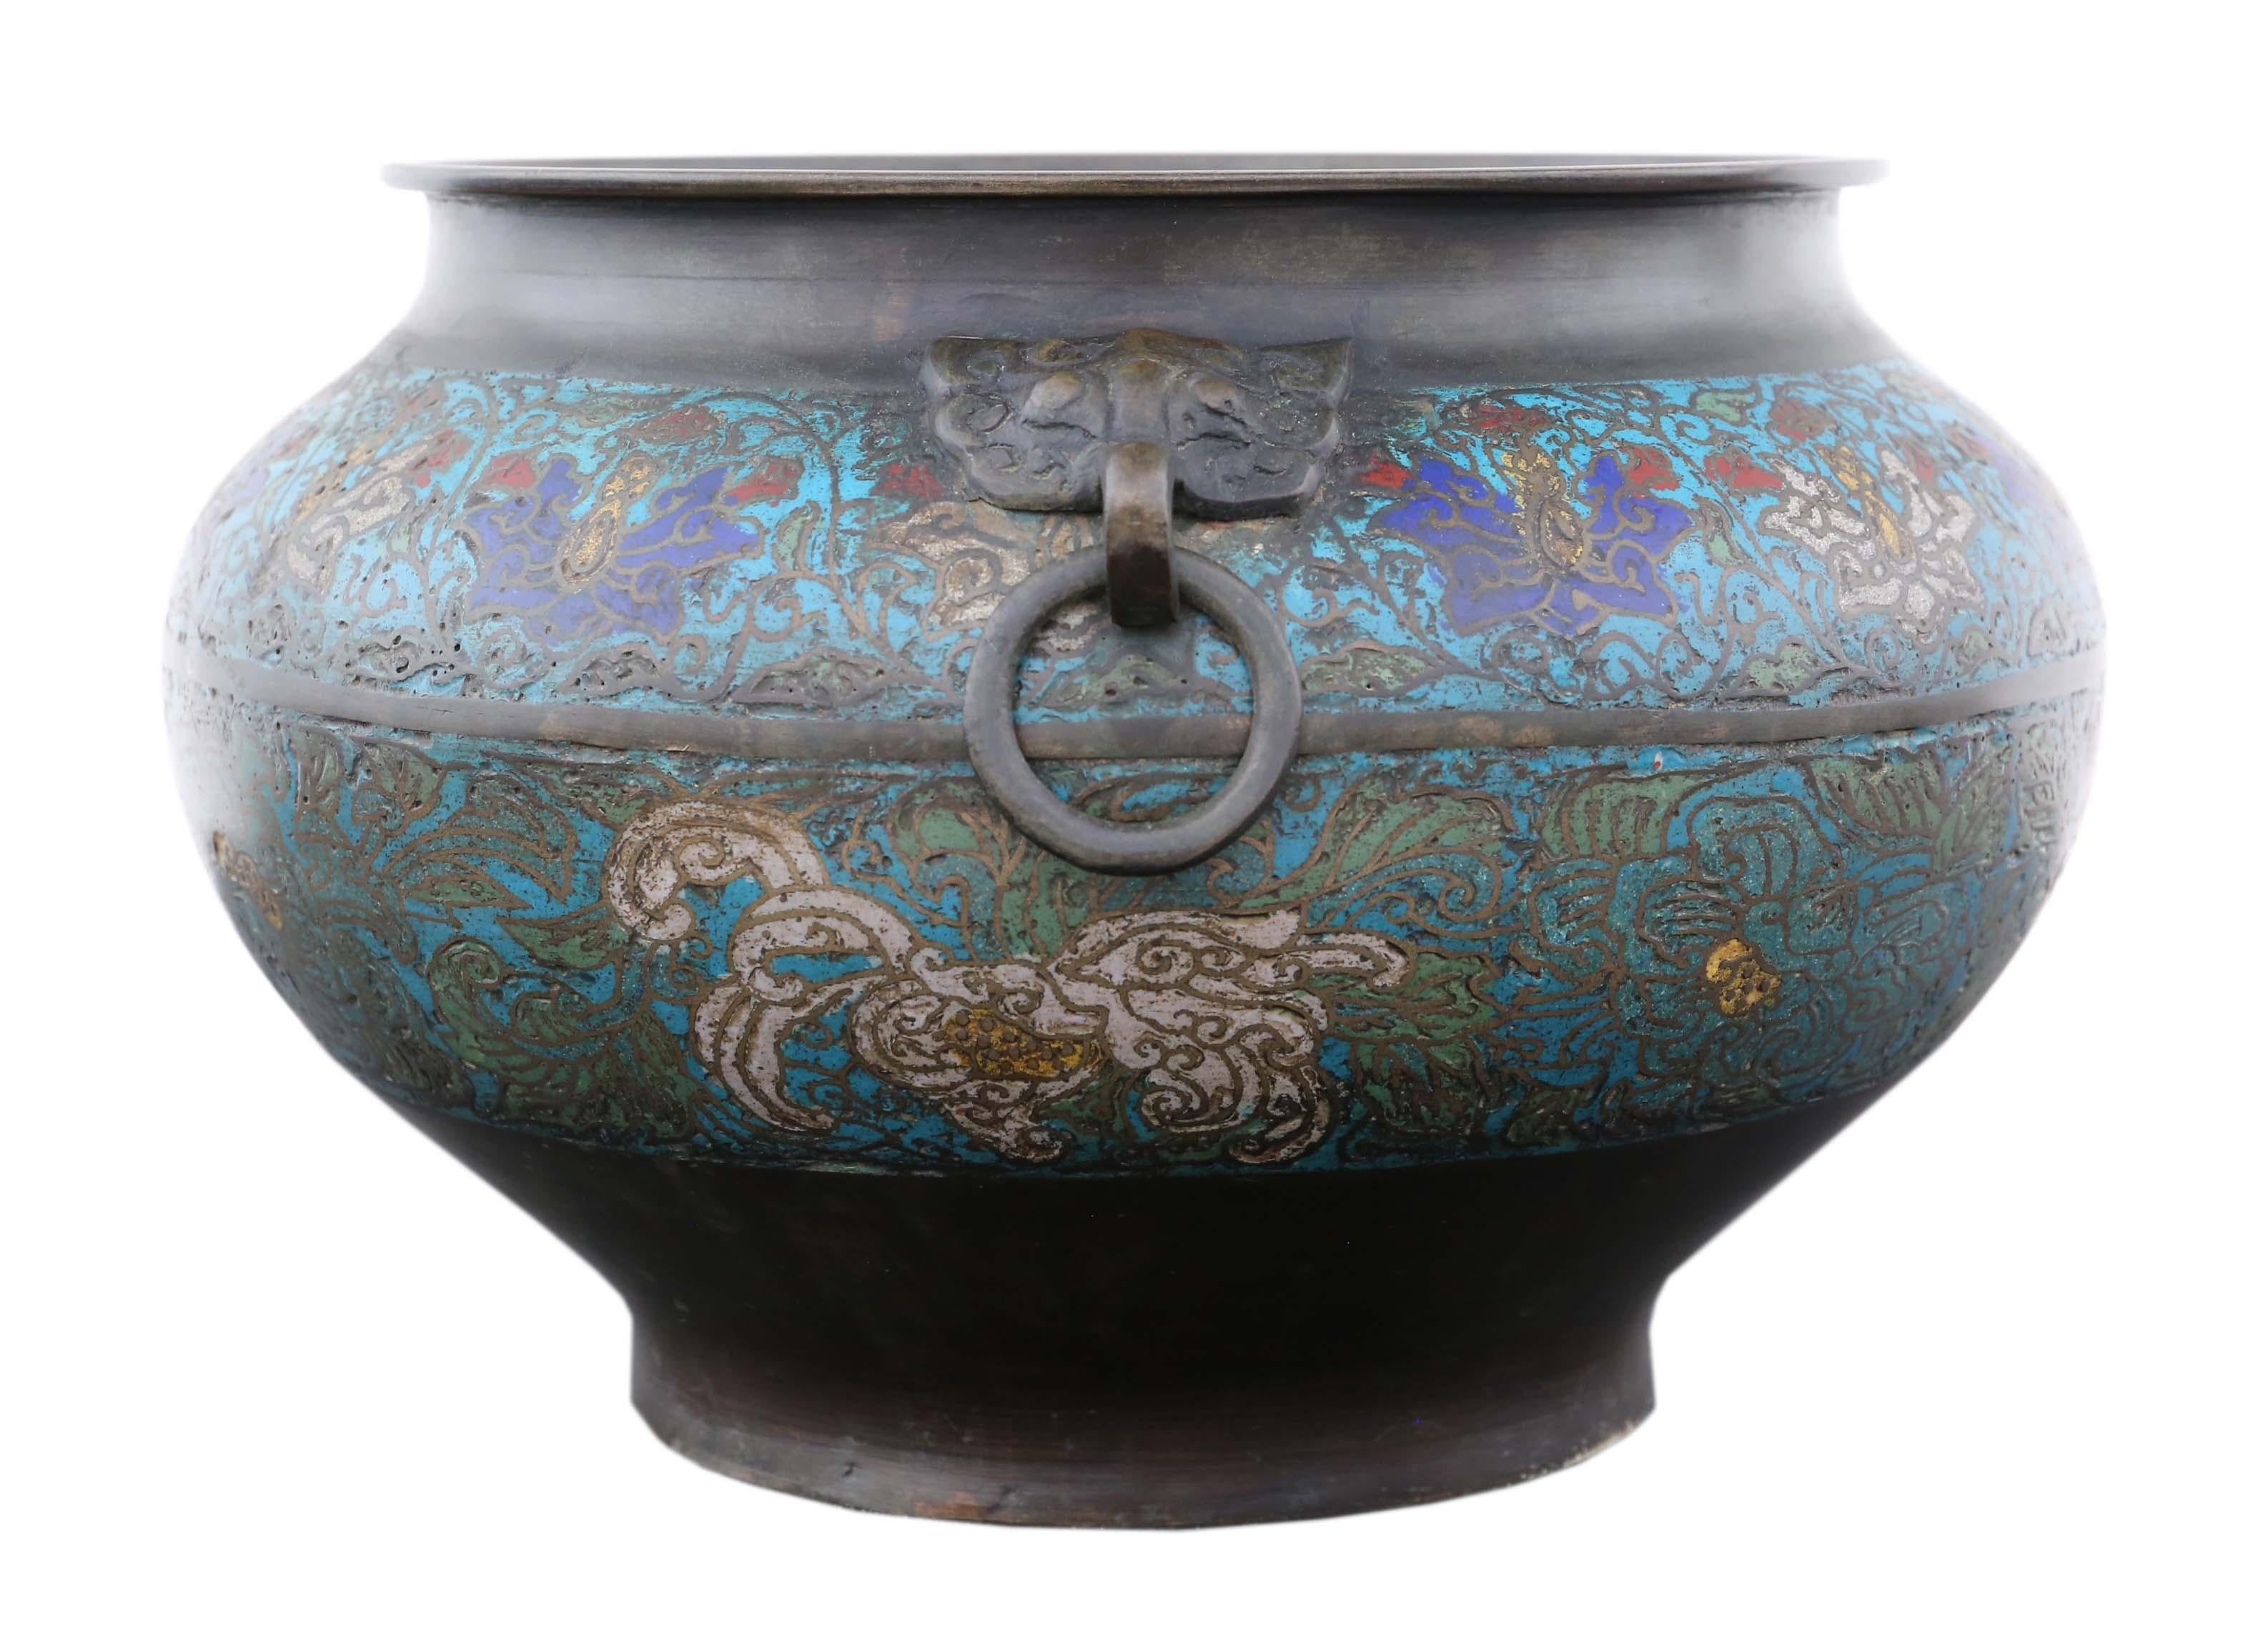 Antique large quality Chinese bronze champlevé planter bowl circa late 19th century. Could possibly be Japanese in the Chinese style from the same period. There is a character seal mark on the base.

Would look amazing in the right location. Best